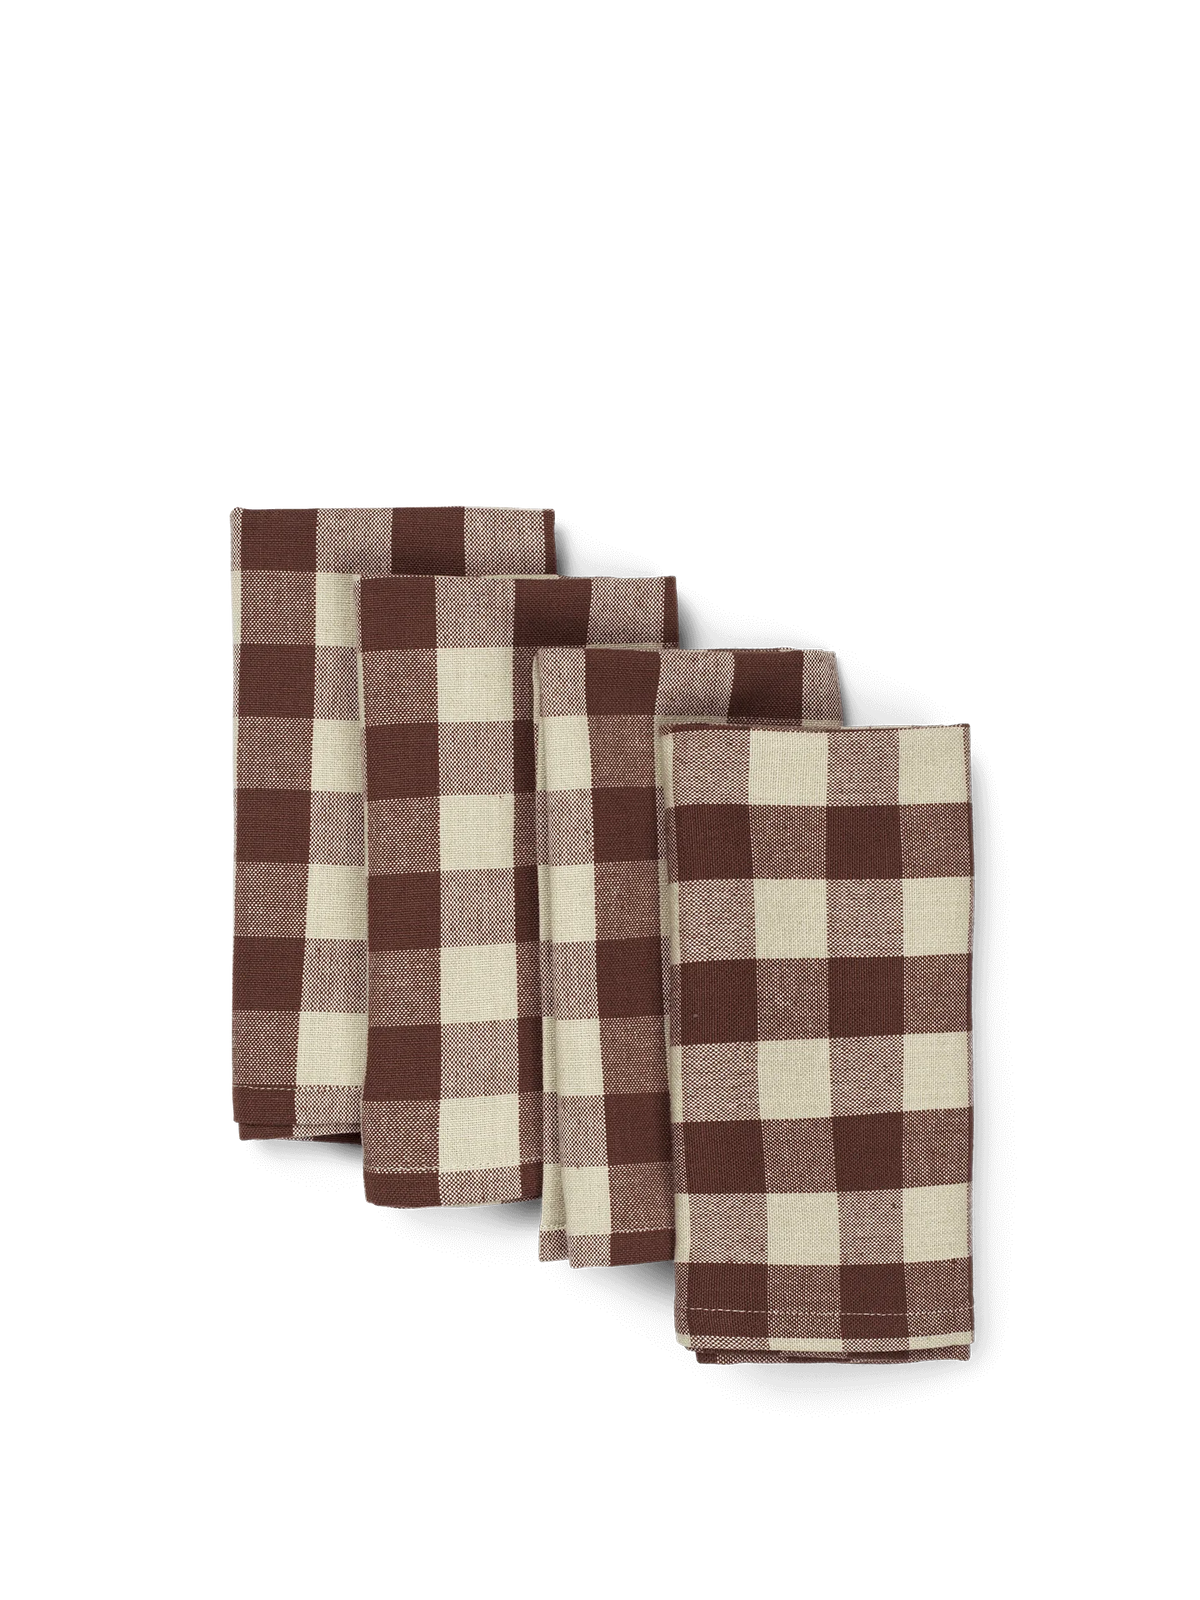 Bothy Check Napkins - Set of 4 by Ferm Living